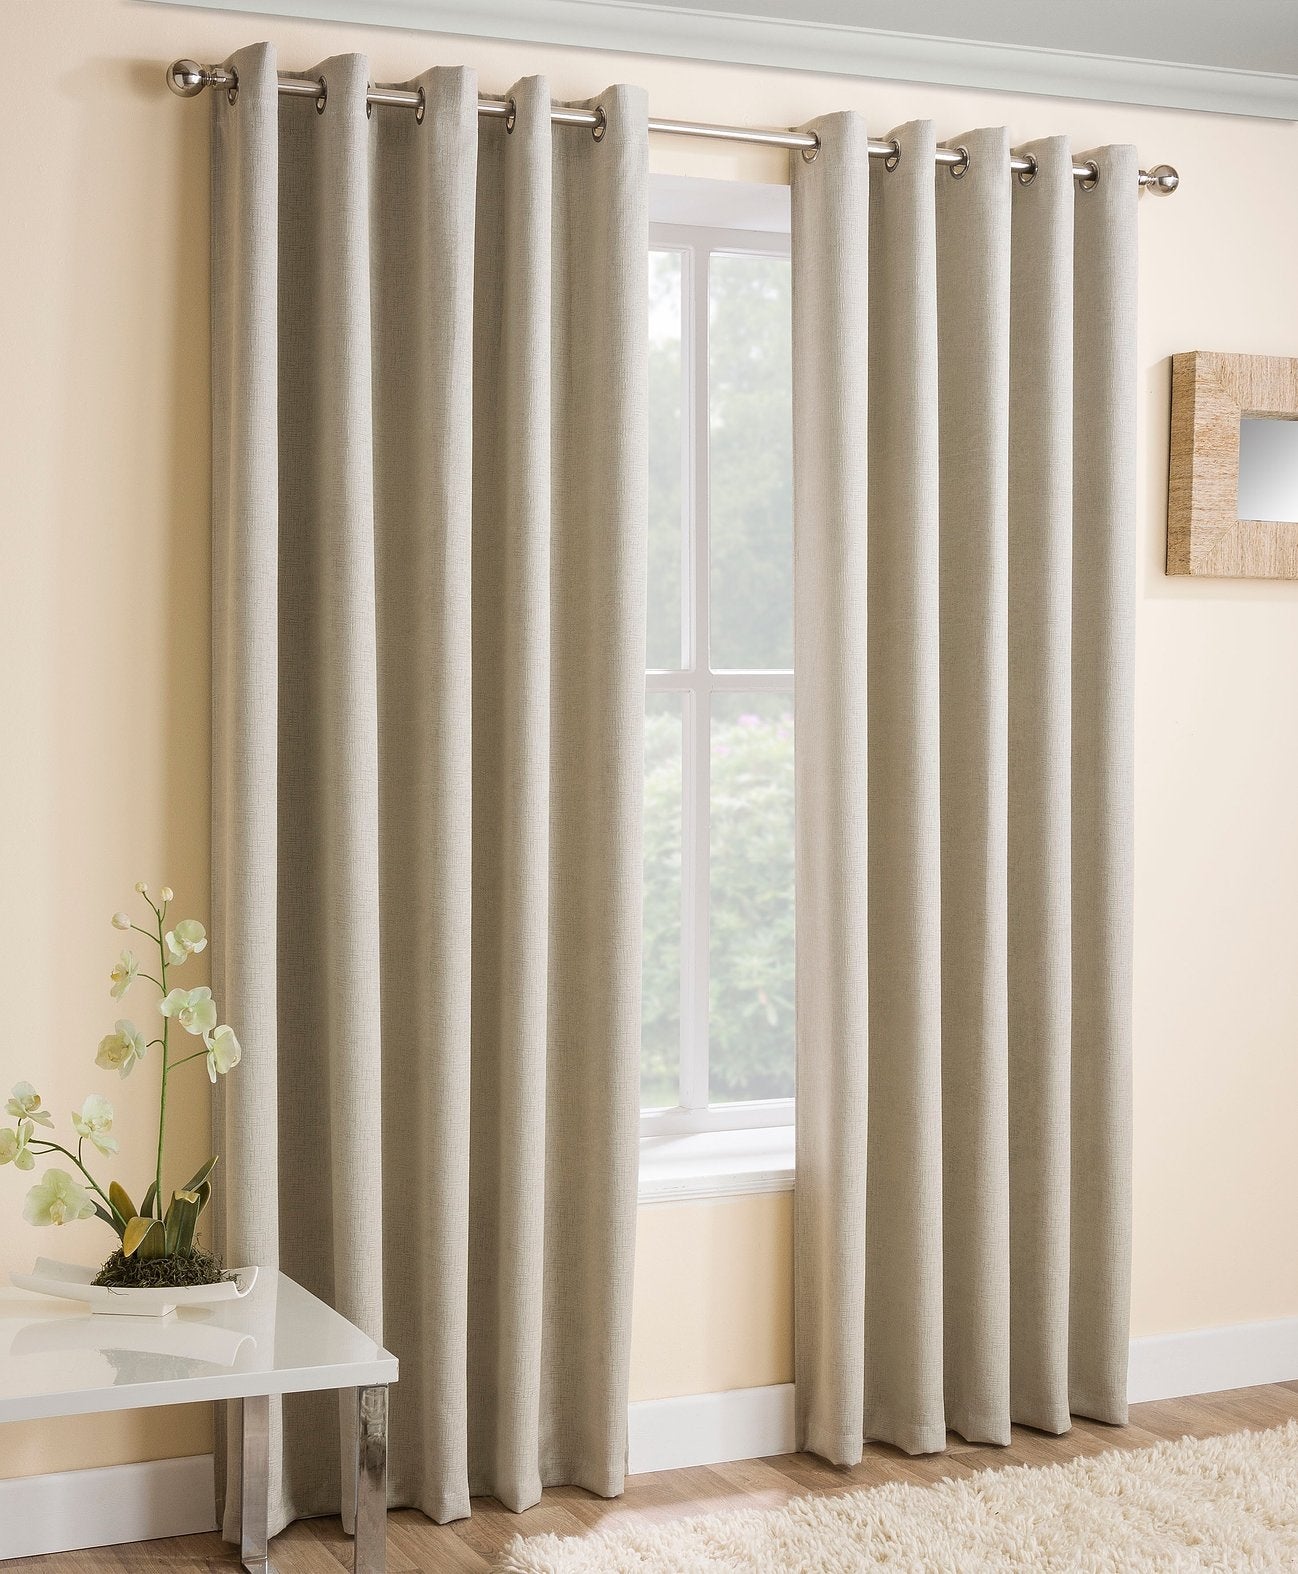 90x108" Vogue Blockout Lined Curtains - Cream